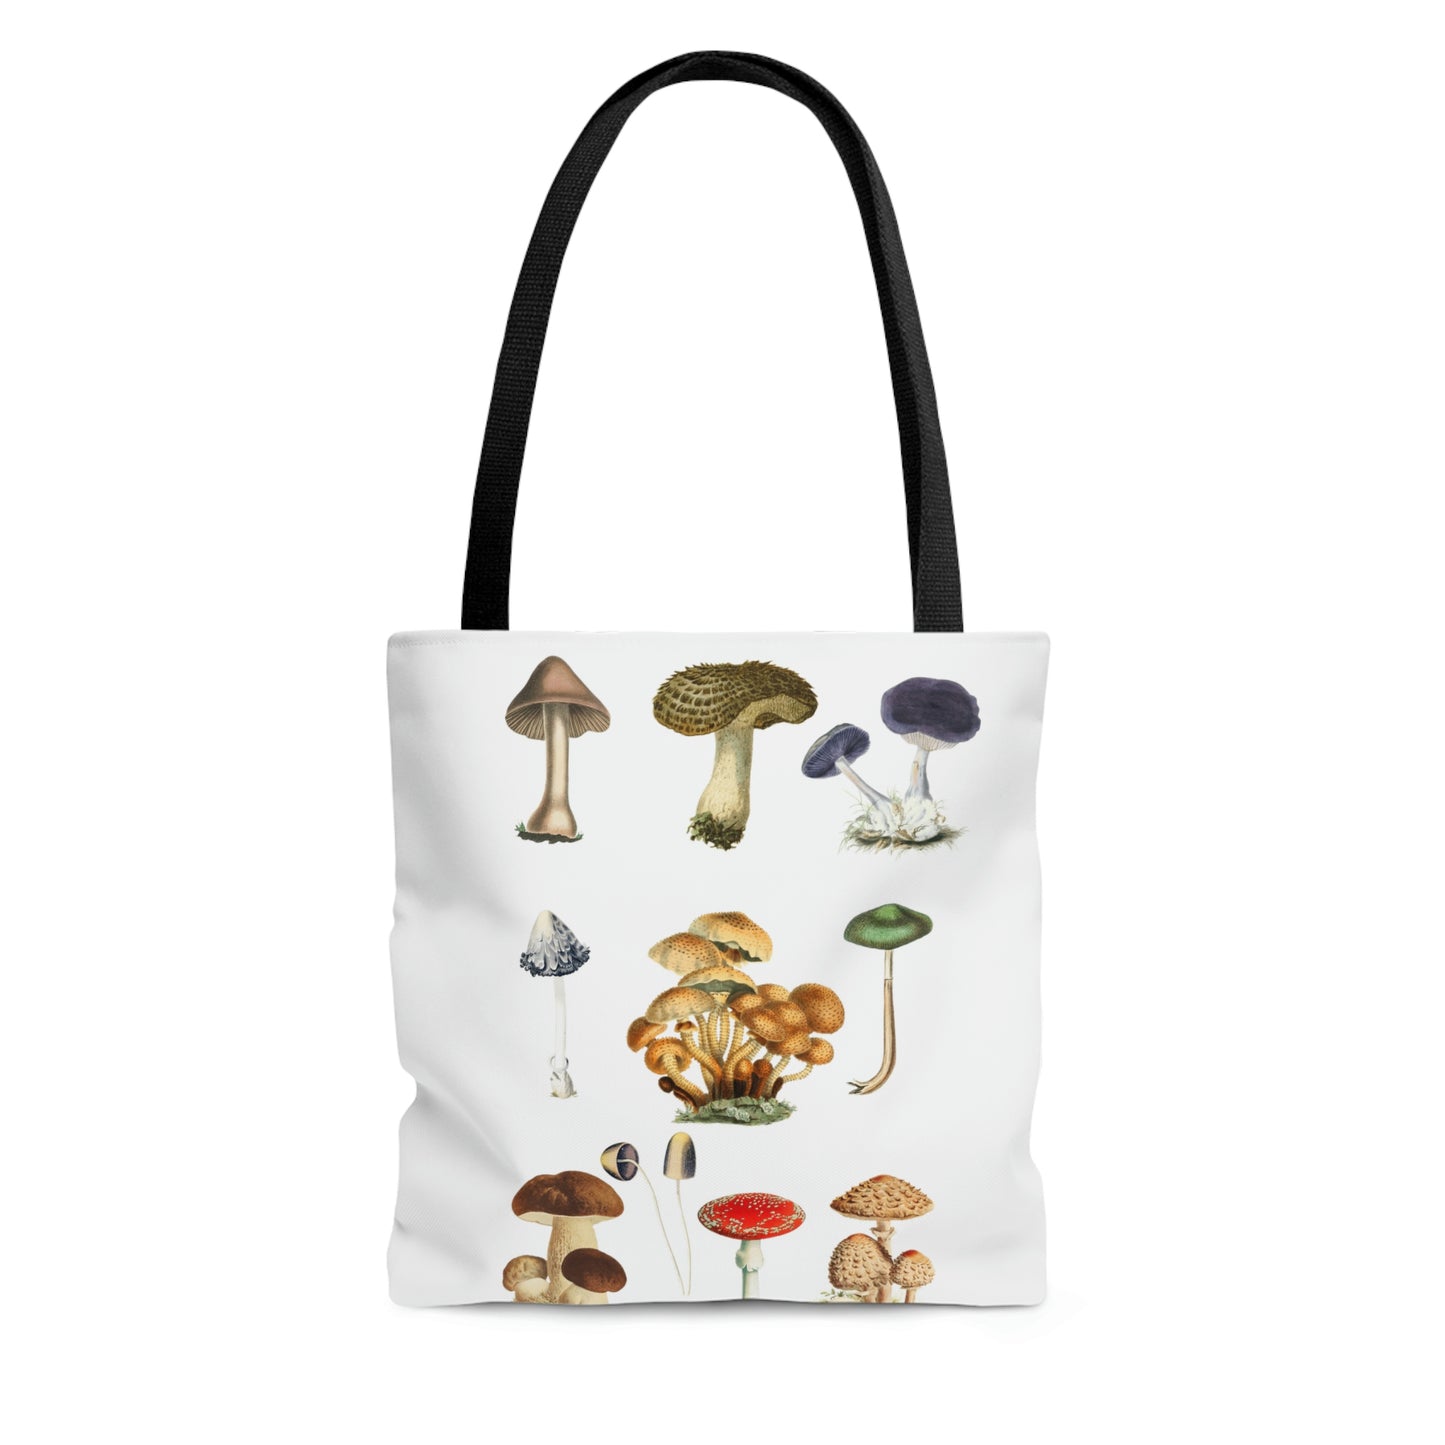 Types of Mushrooms Tote Bag, High Quality, All-Over Print Tote Bag